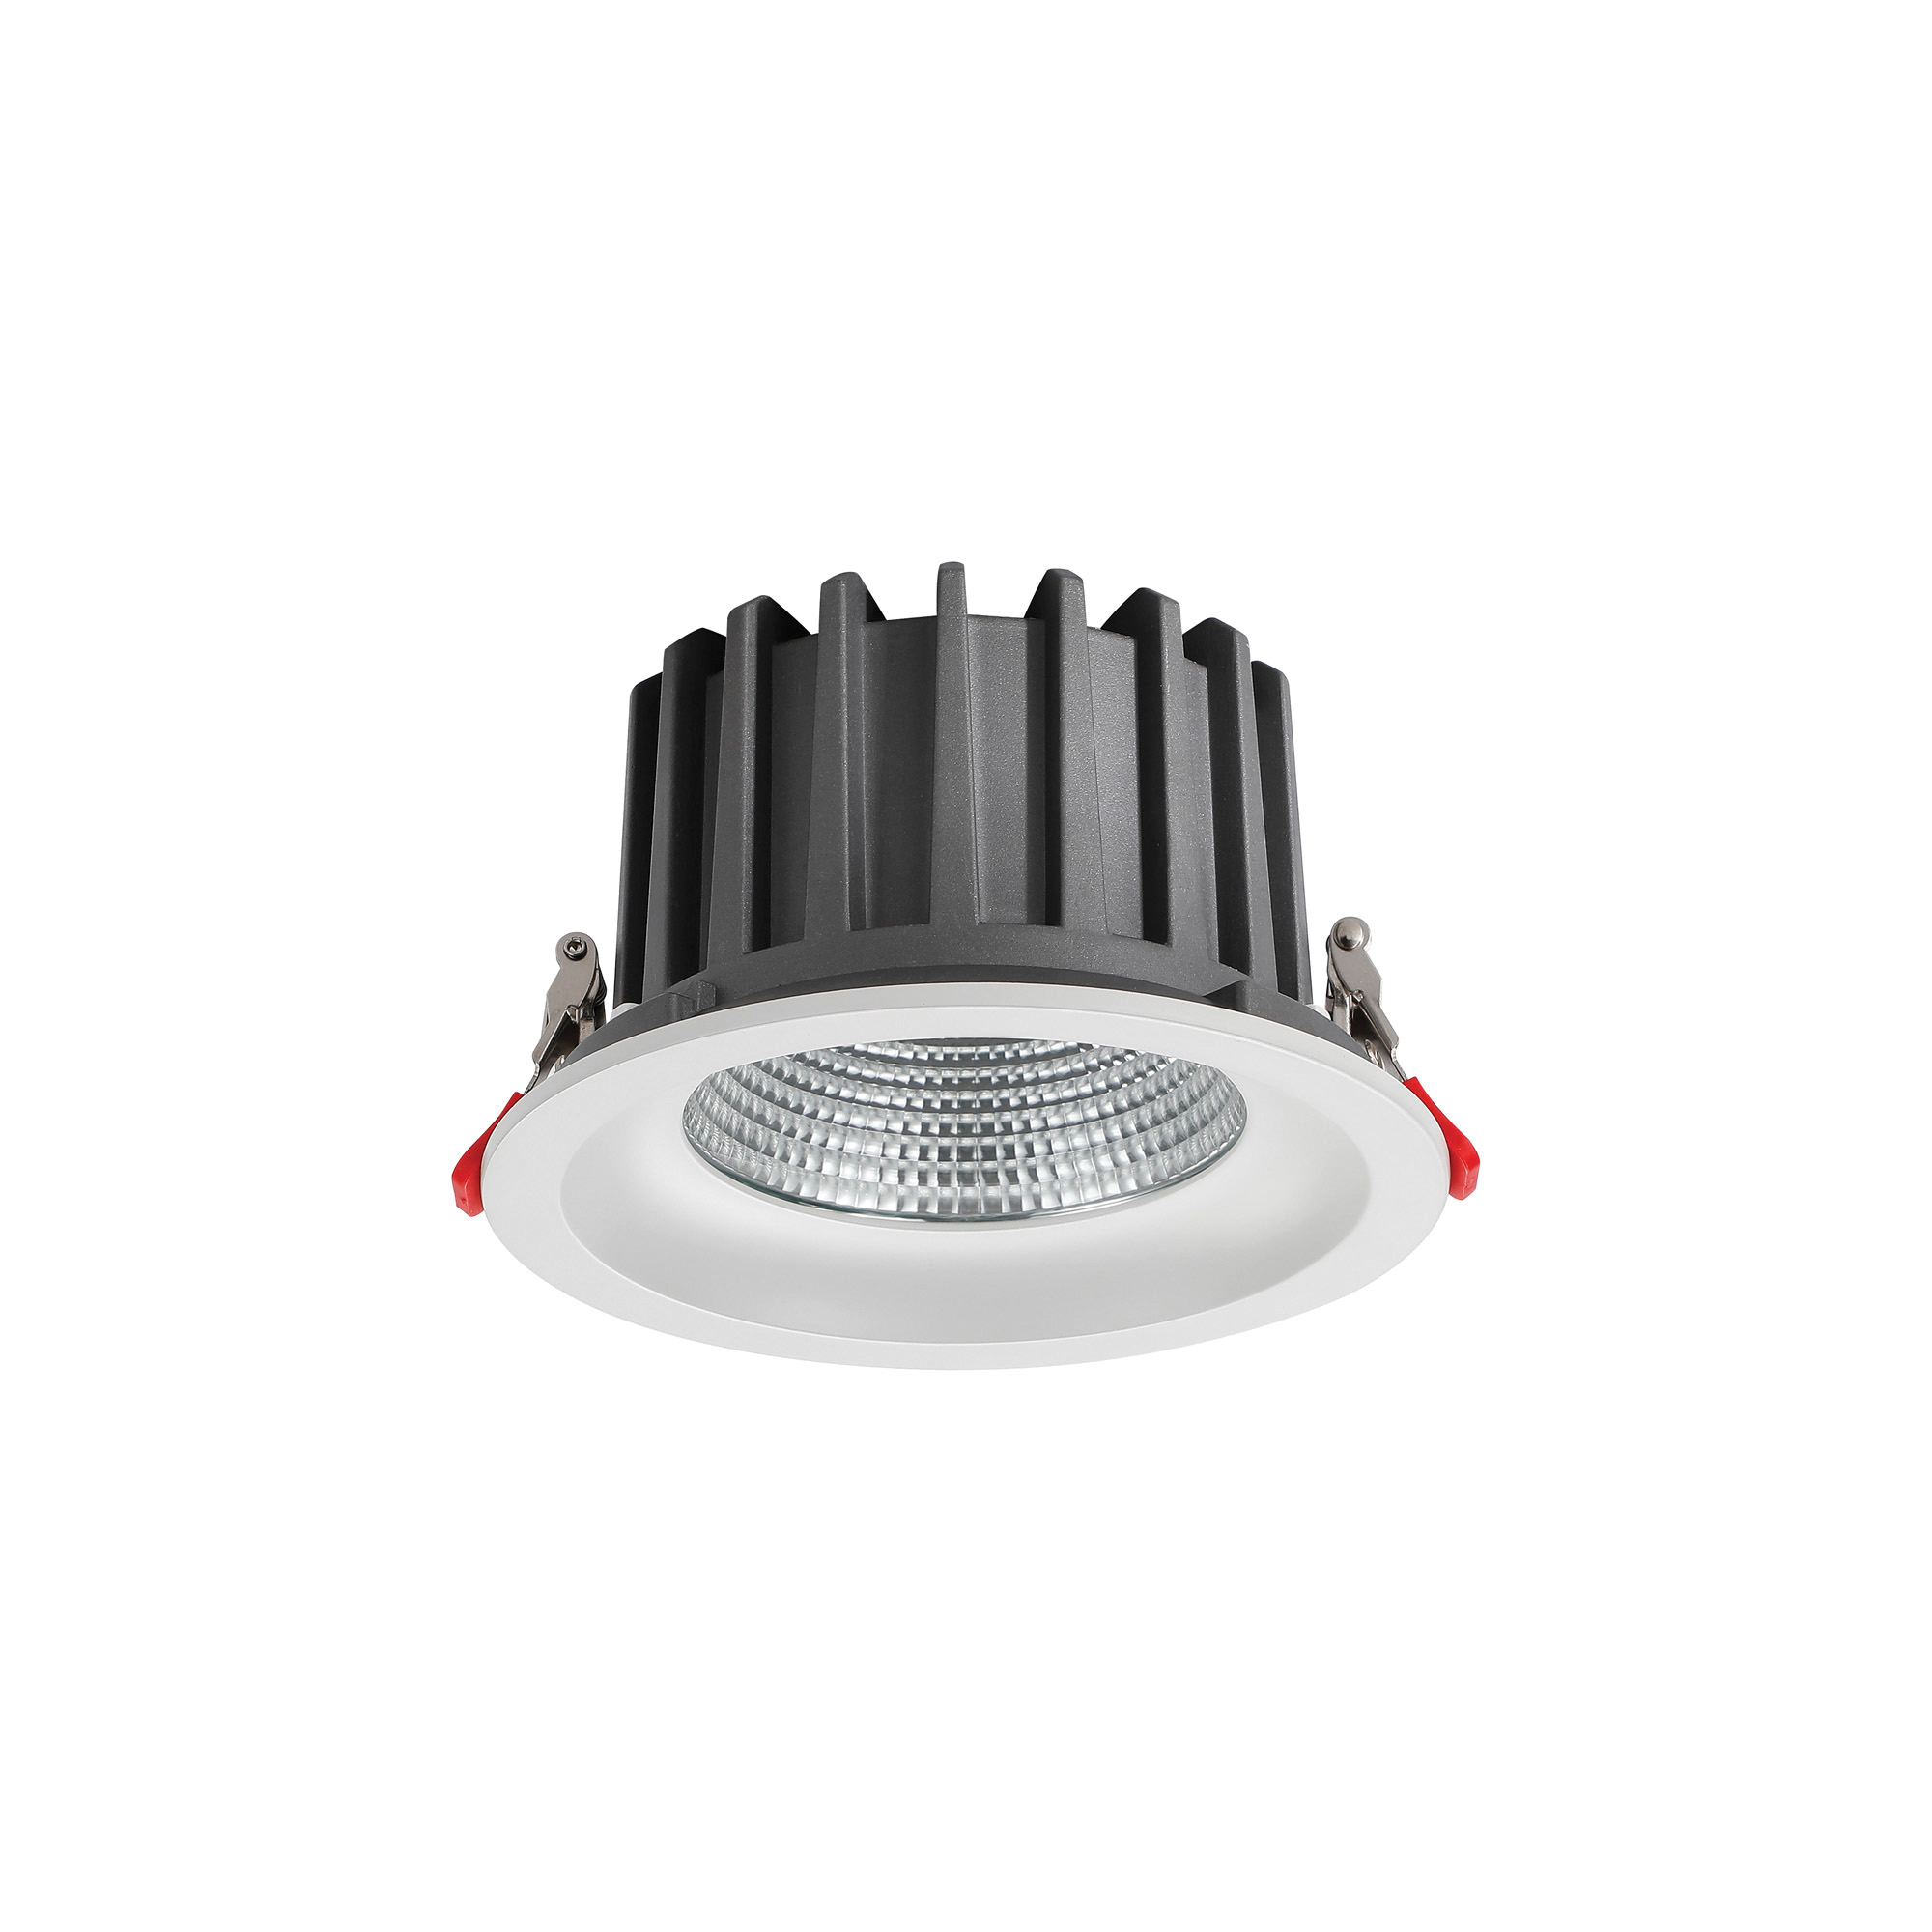 DL200061  Bionic 30; 30W; 700mA; White Deep Round Recessed Downlight; 2400lm ;Cut Out 155mm; 42° ; 3000K; IP44; DRIVER INC.; 5yrs Warranty.